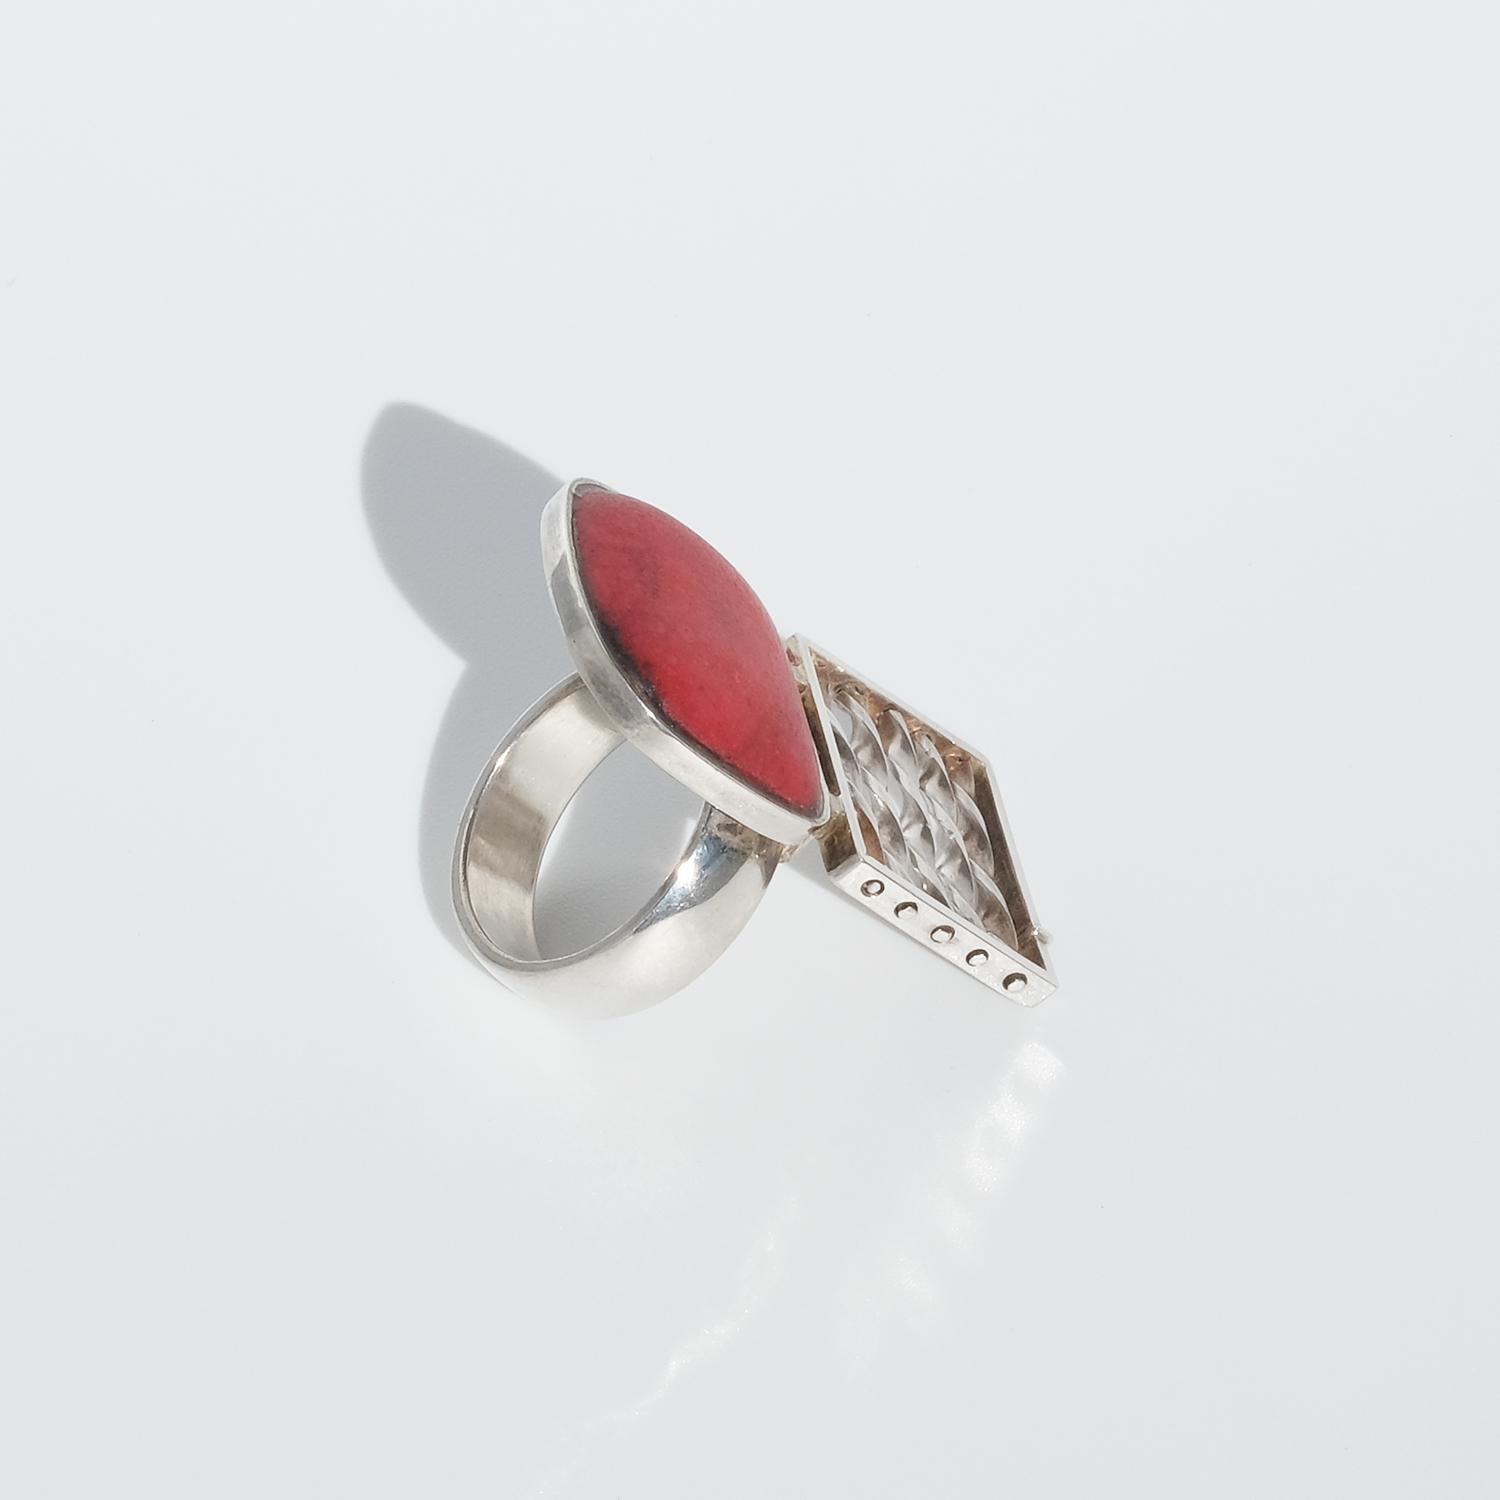 Silver and Red Stone Ring by Thomas Raschke For Sale 1